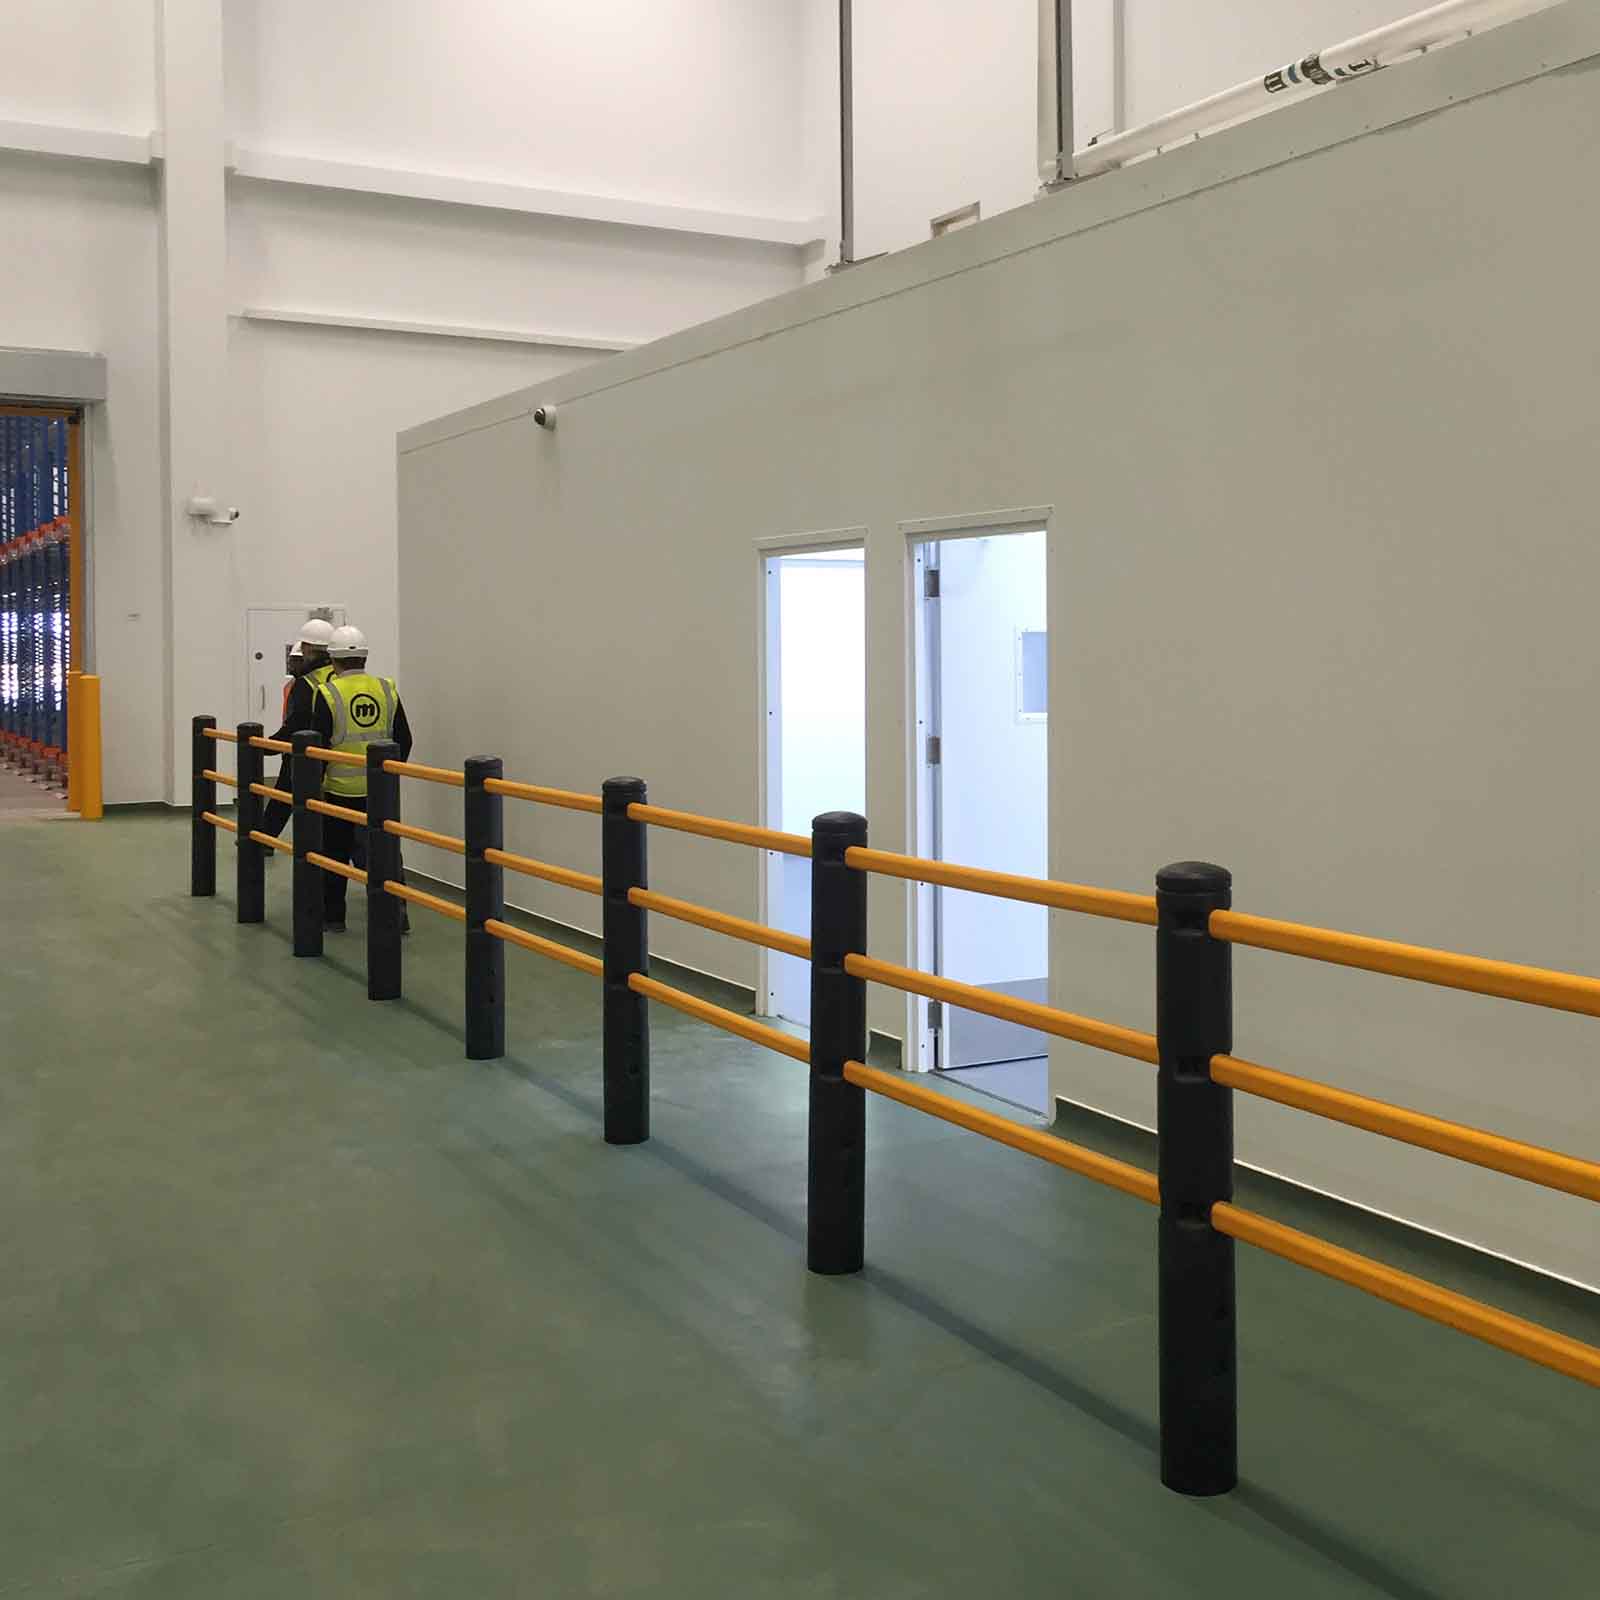 McCue Pedestrian Barrier Safety Protection in Warehouse